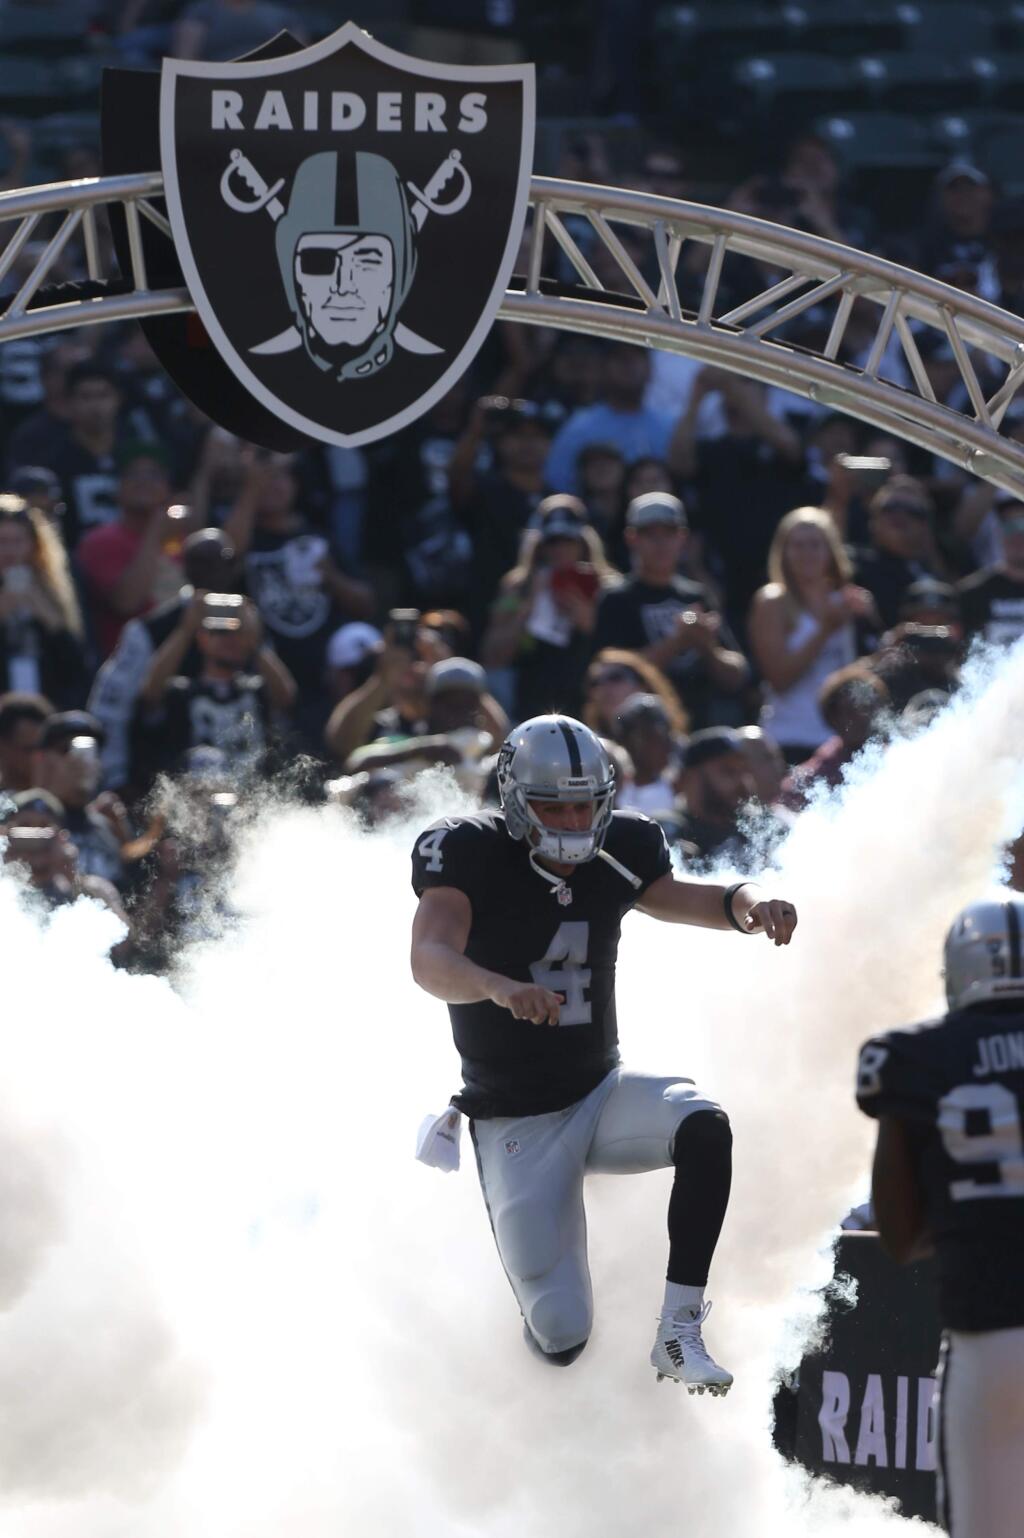 Oakland Raiders quarterback Derek Carr is introduced to the crowd before the game against the Tennessee Titans in Oakland on Saturday, August 27, 2016. (Christopher Chung/ The Press Democrat)